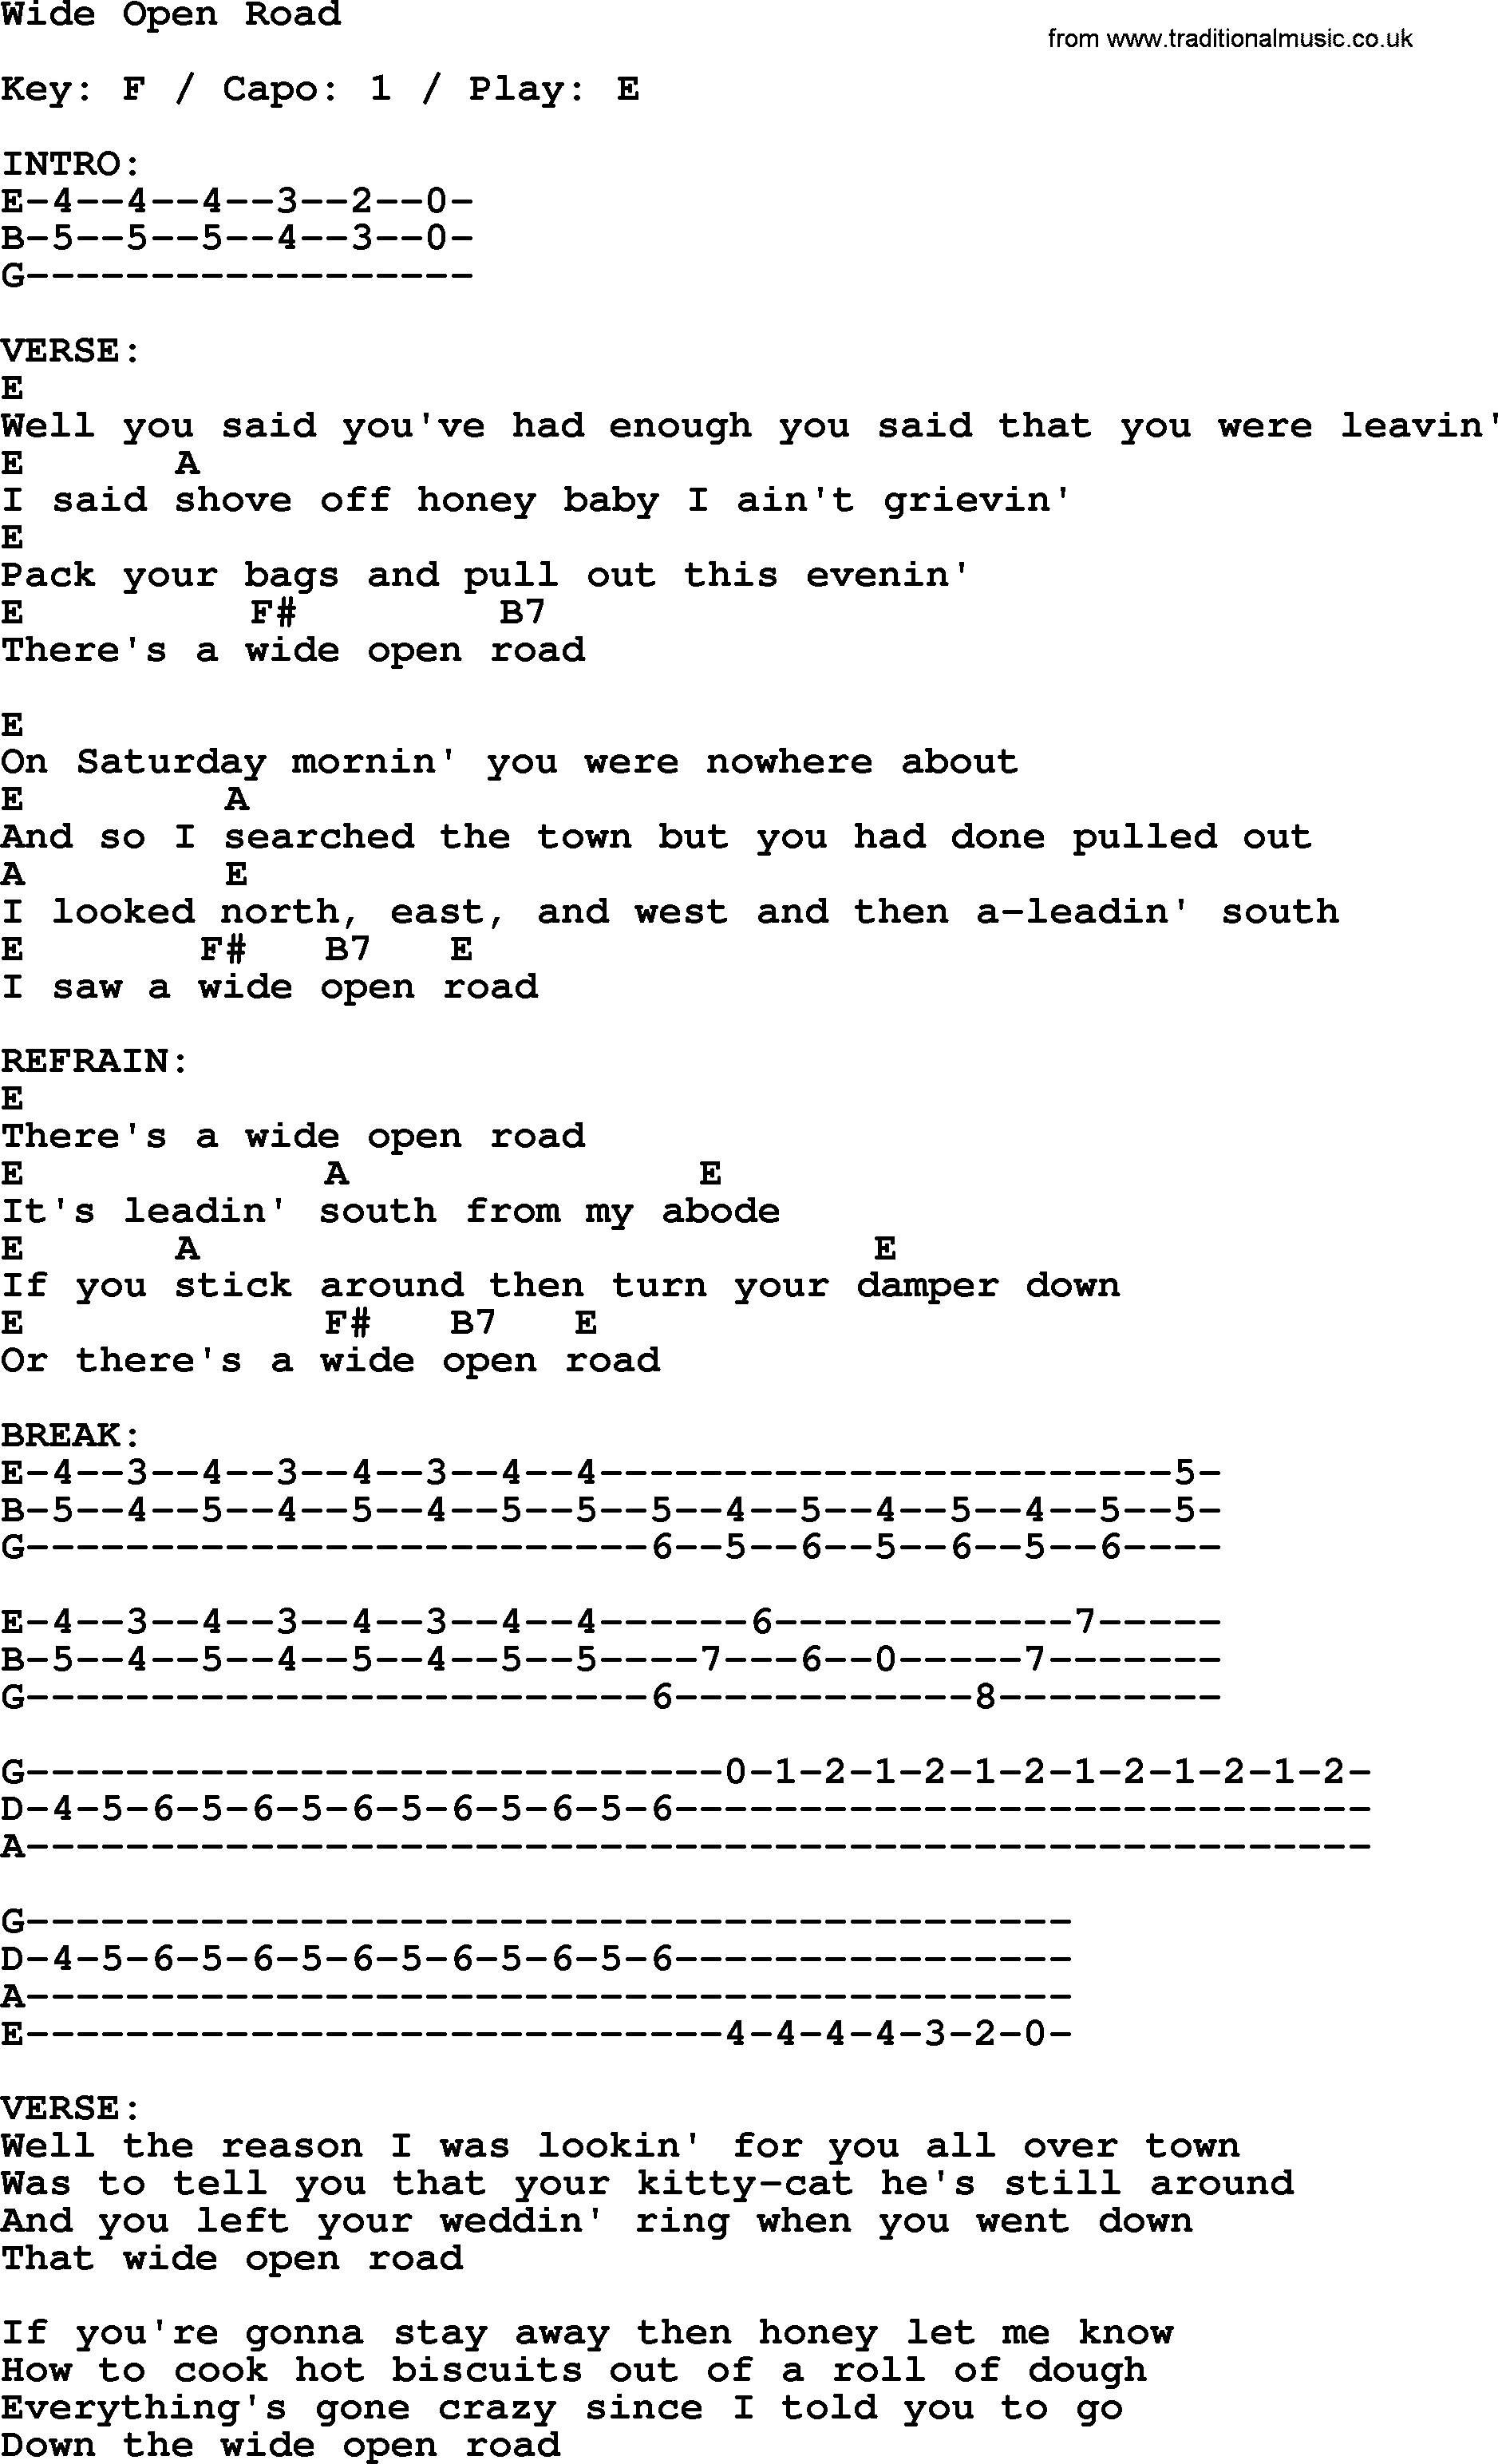 Johnny Cash song Wide Open Road, lyrics and chords